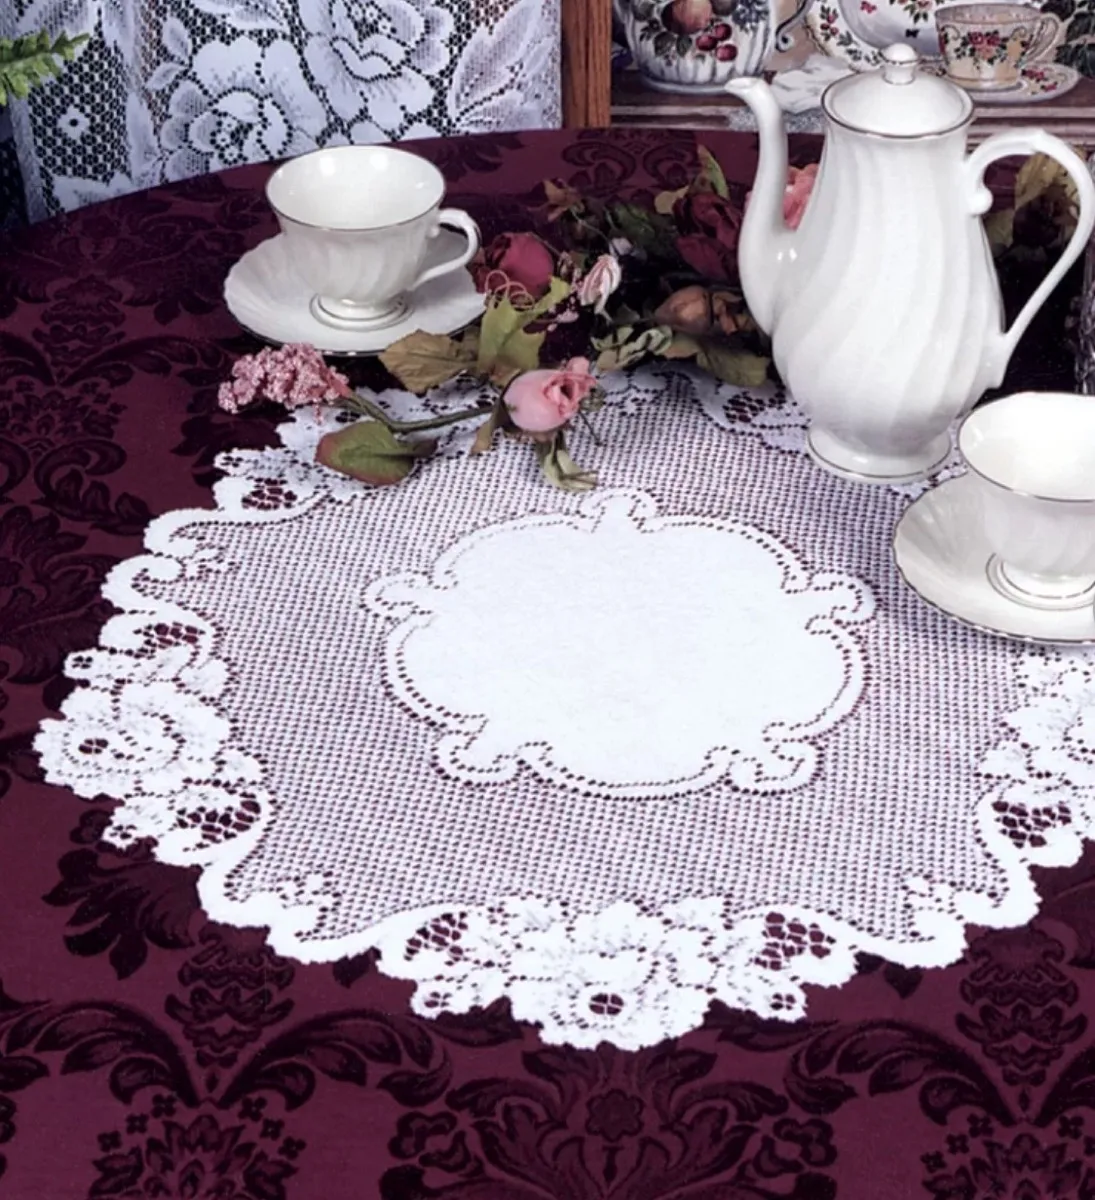 lace doilly, old fashioned home items